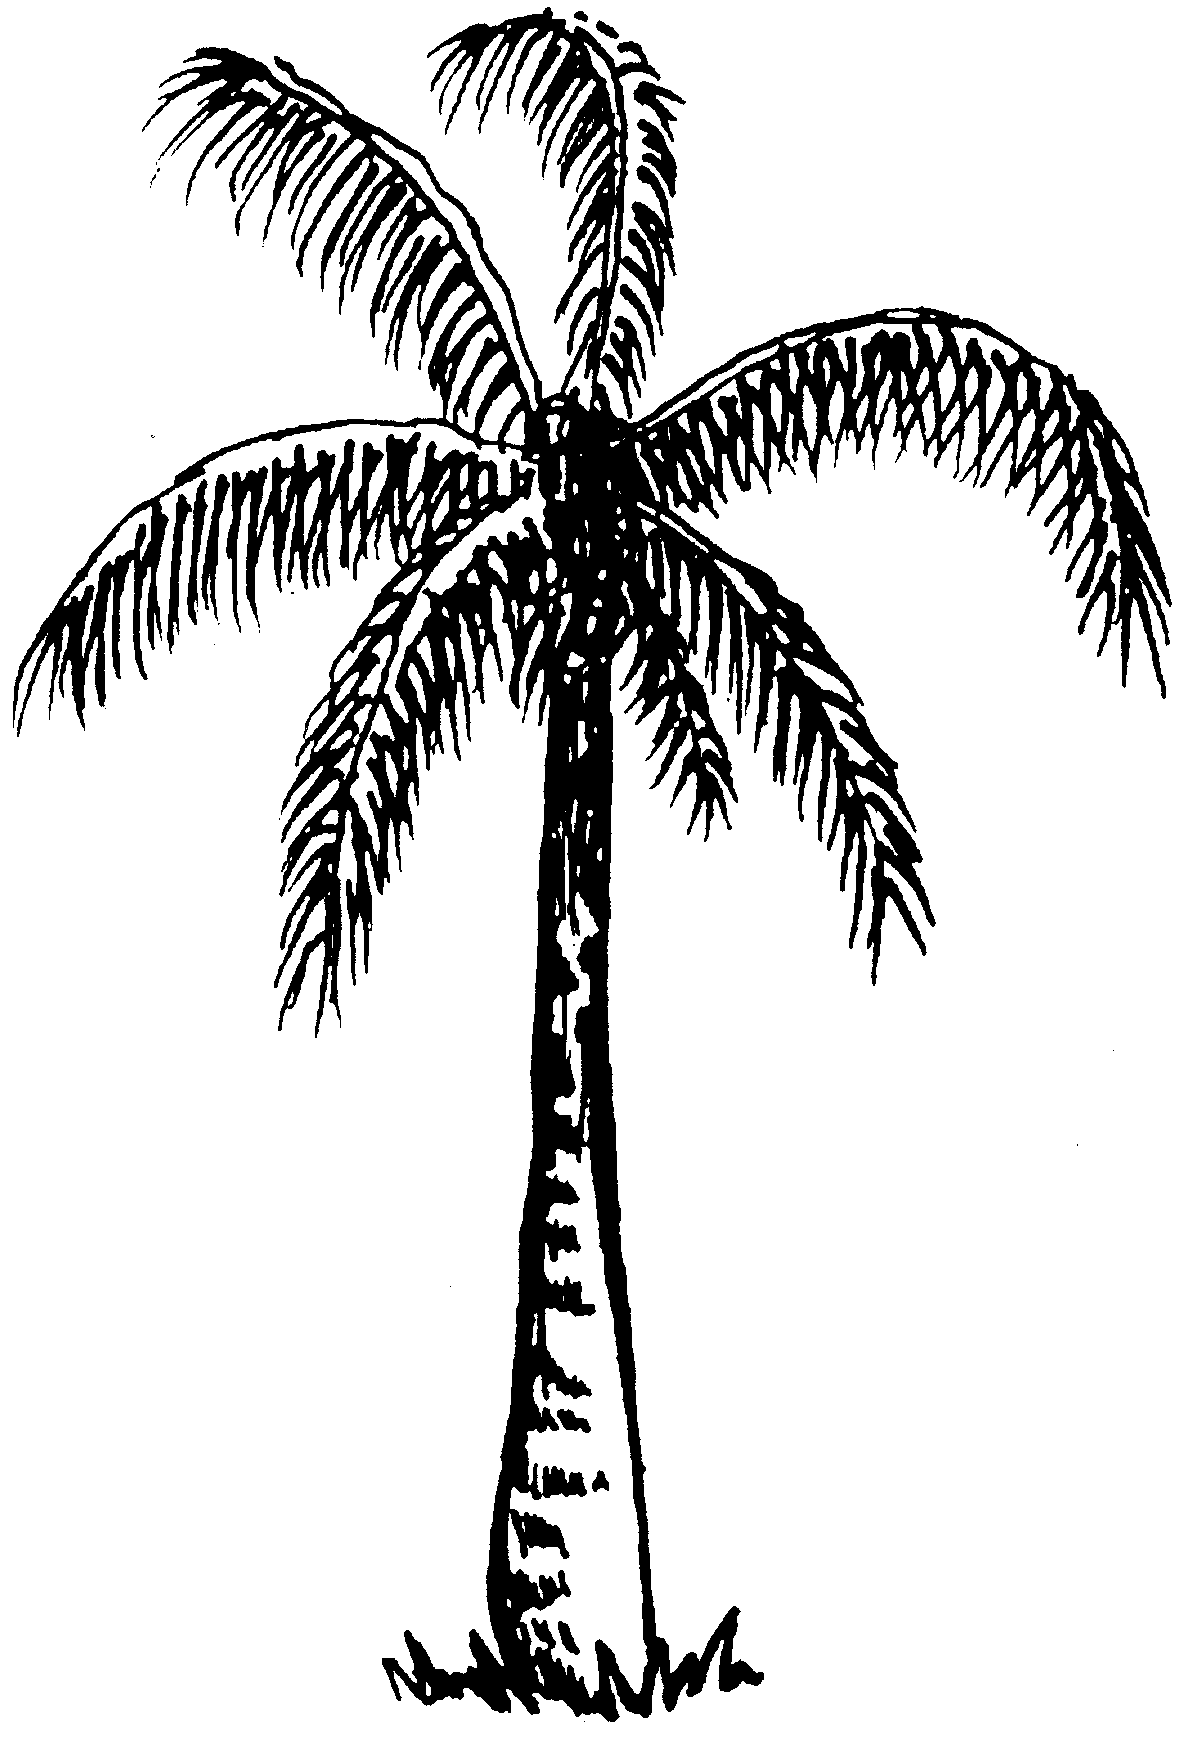 free black and white clipart of trees - photo #33